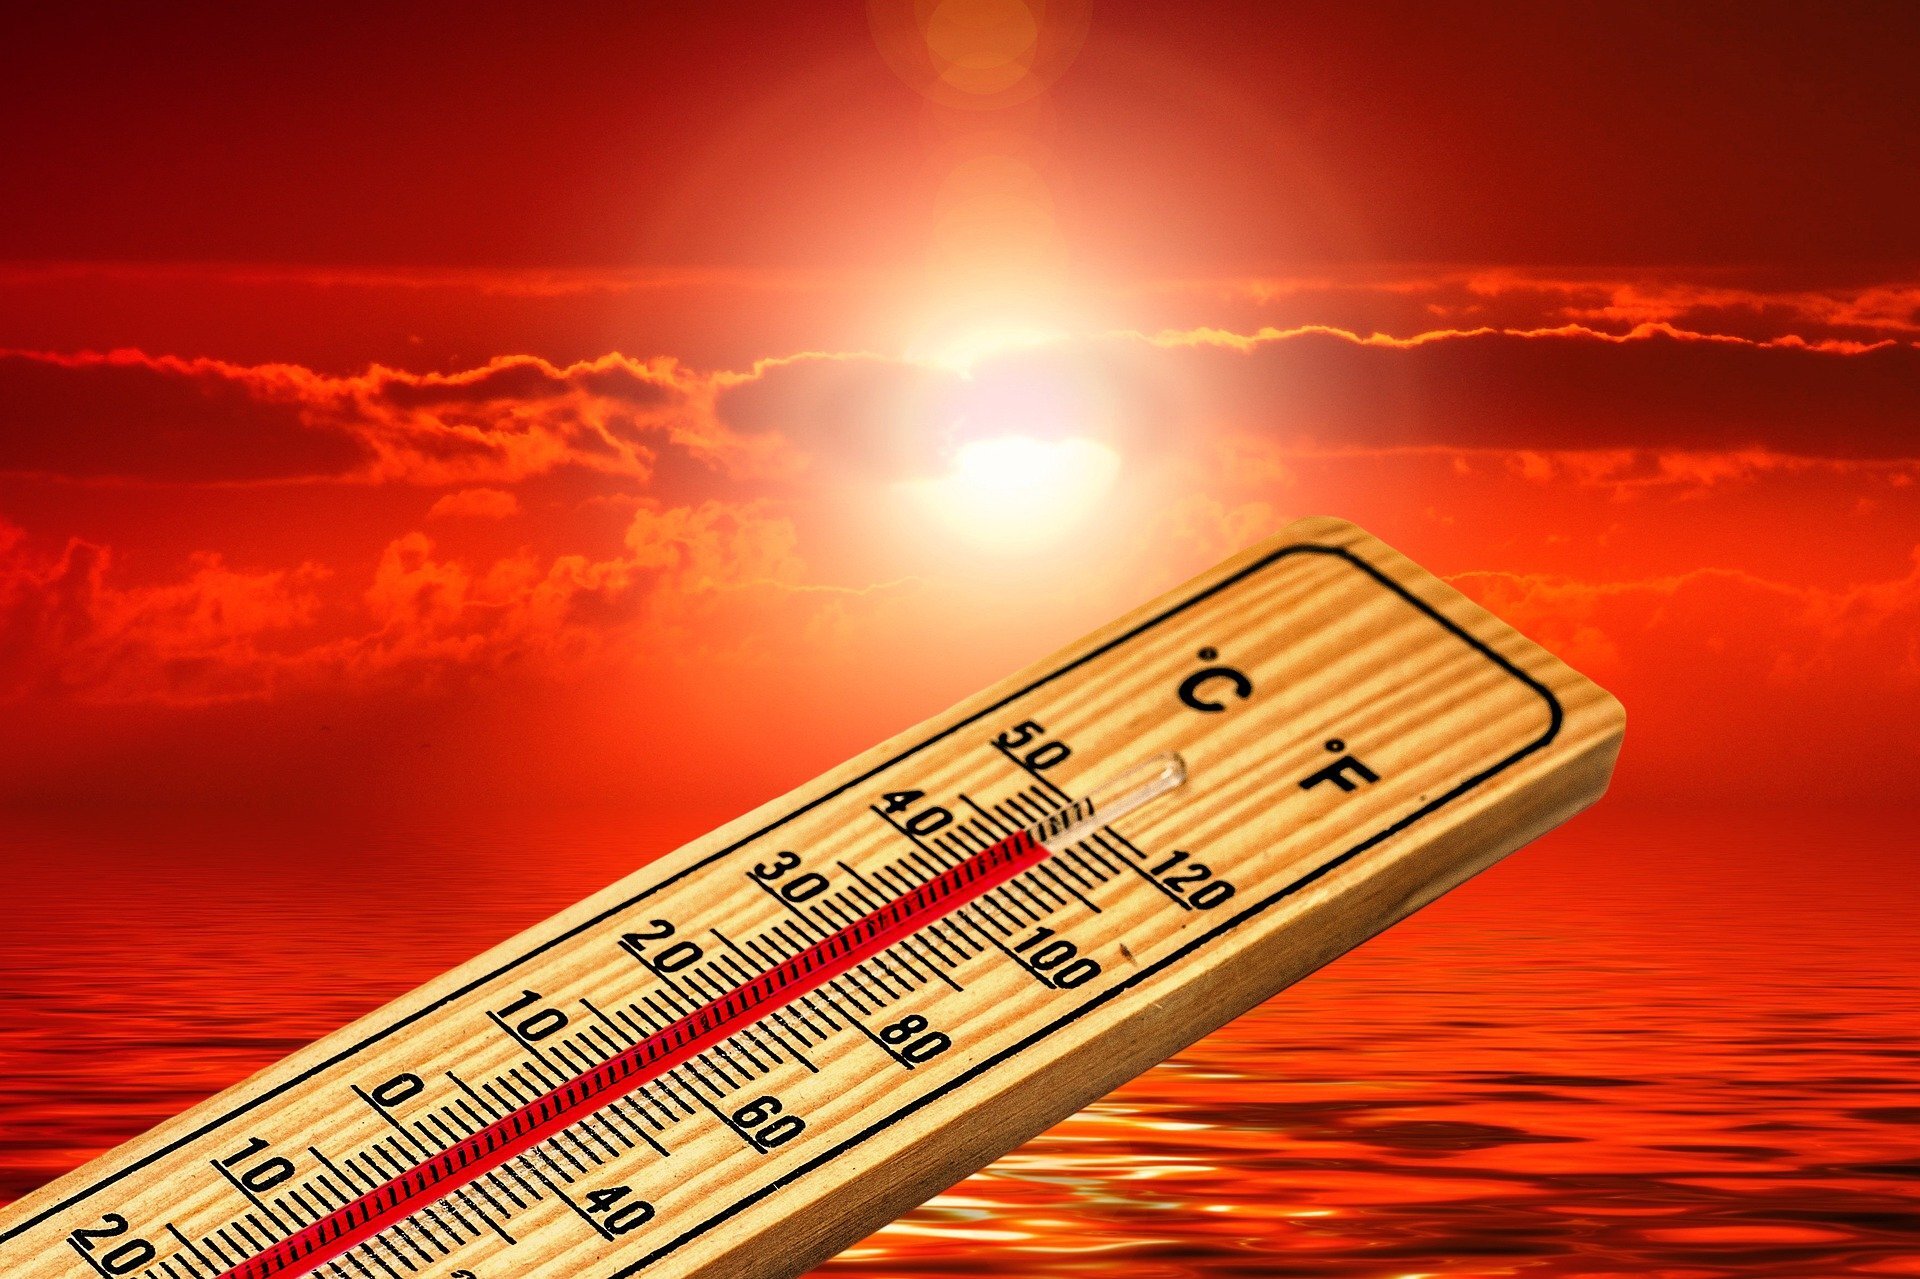 Heat-related symptoms affected one-quarter of Americans during summer of 2020